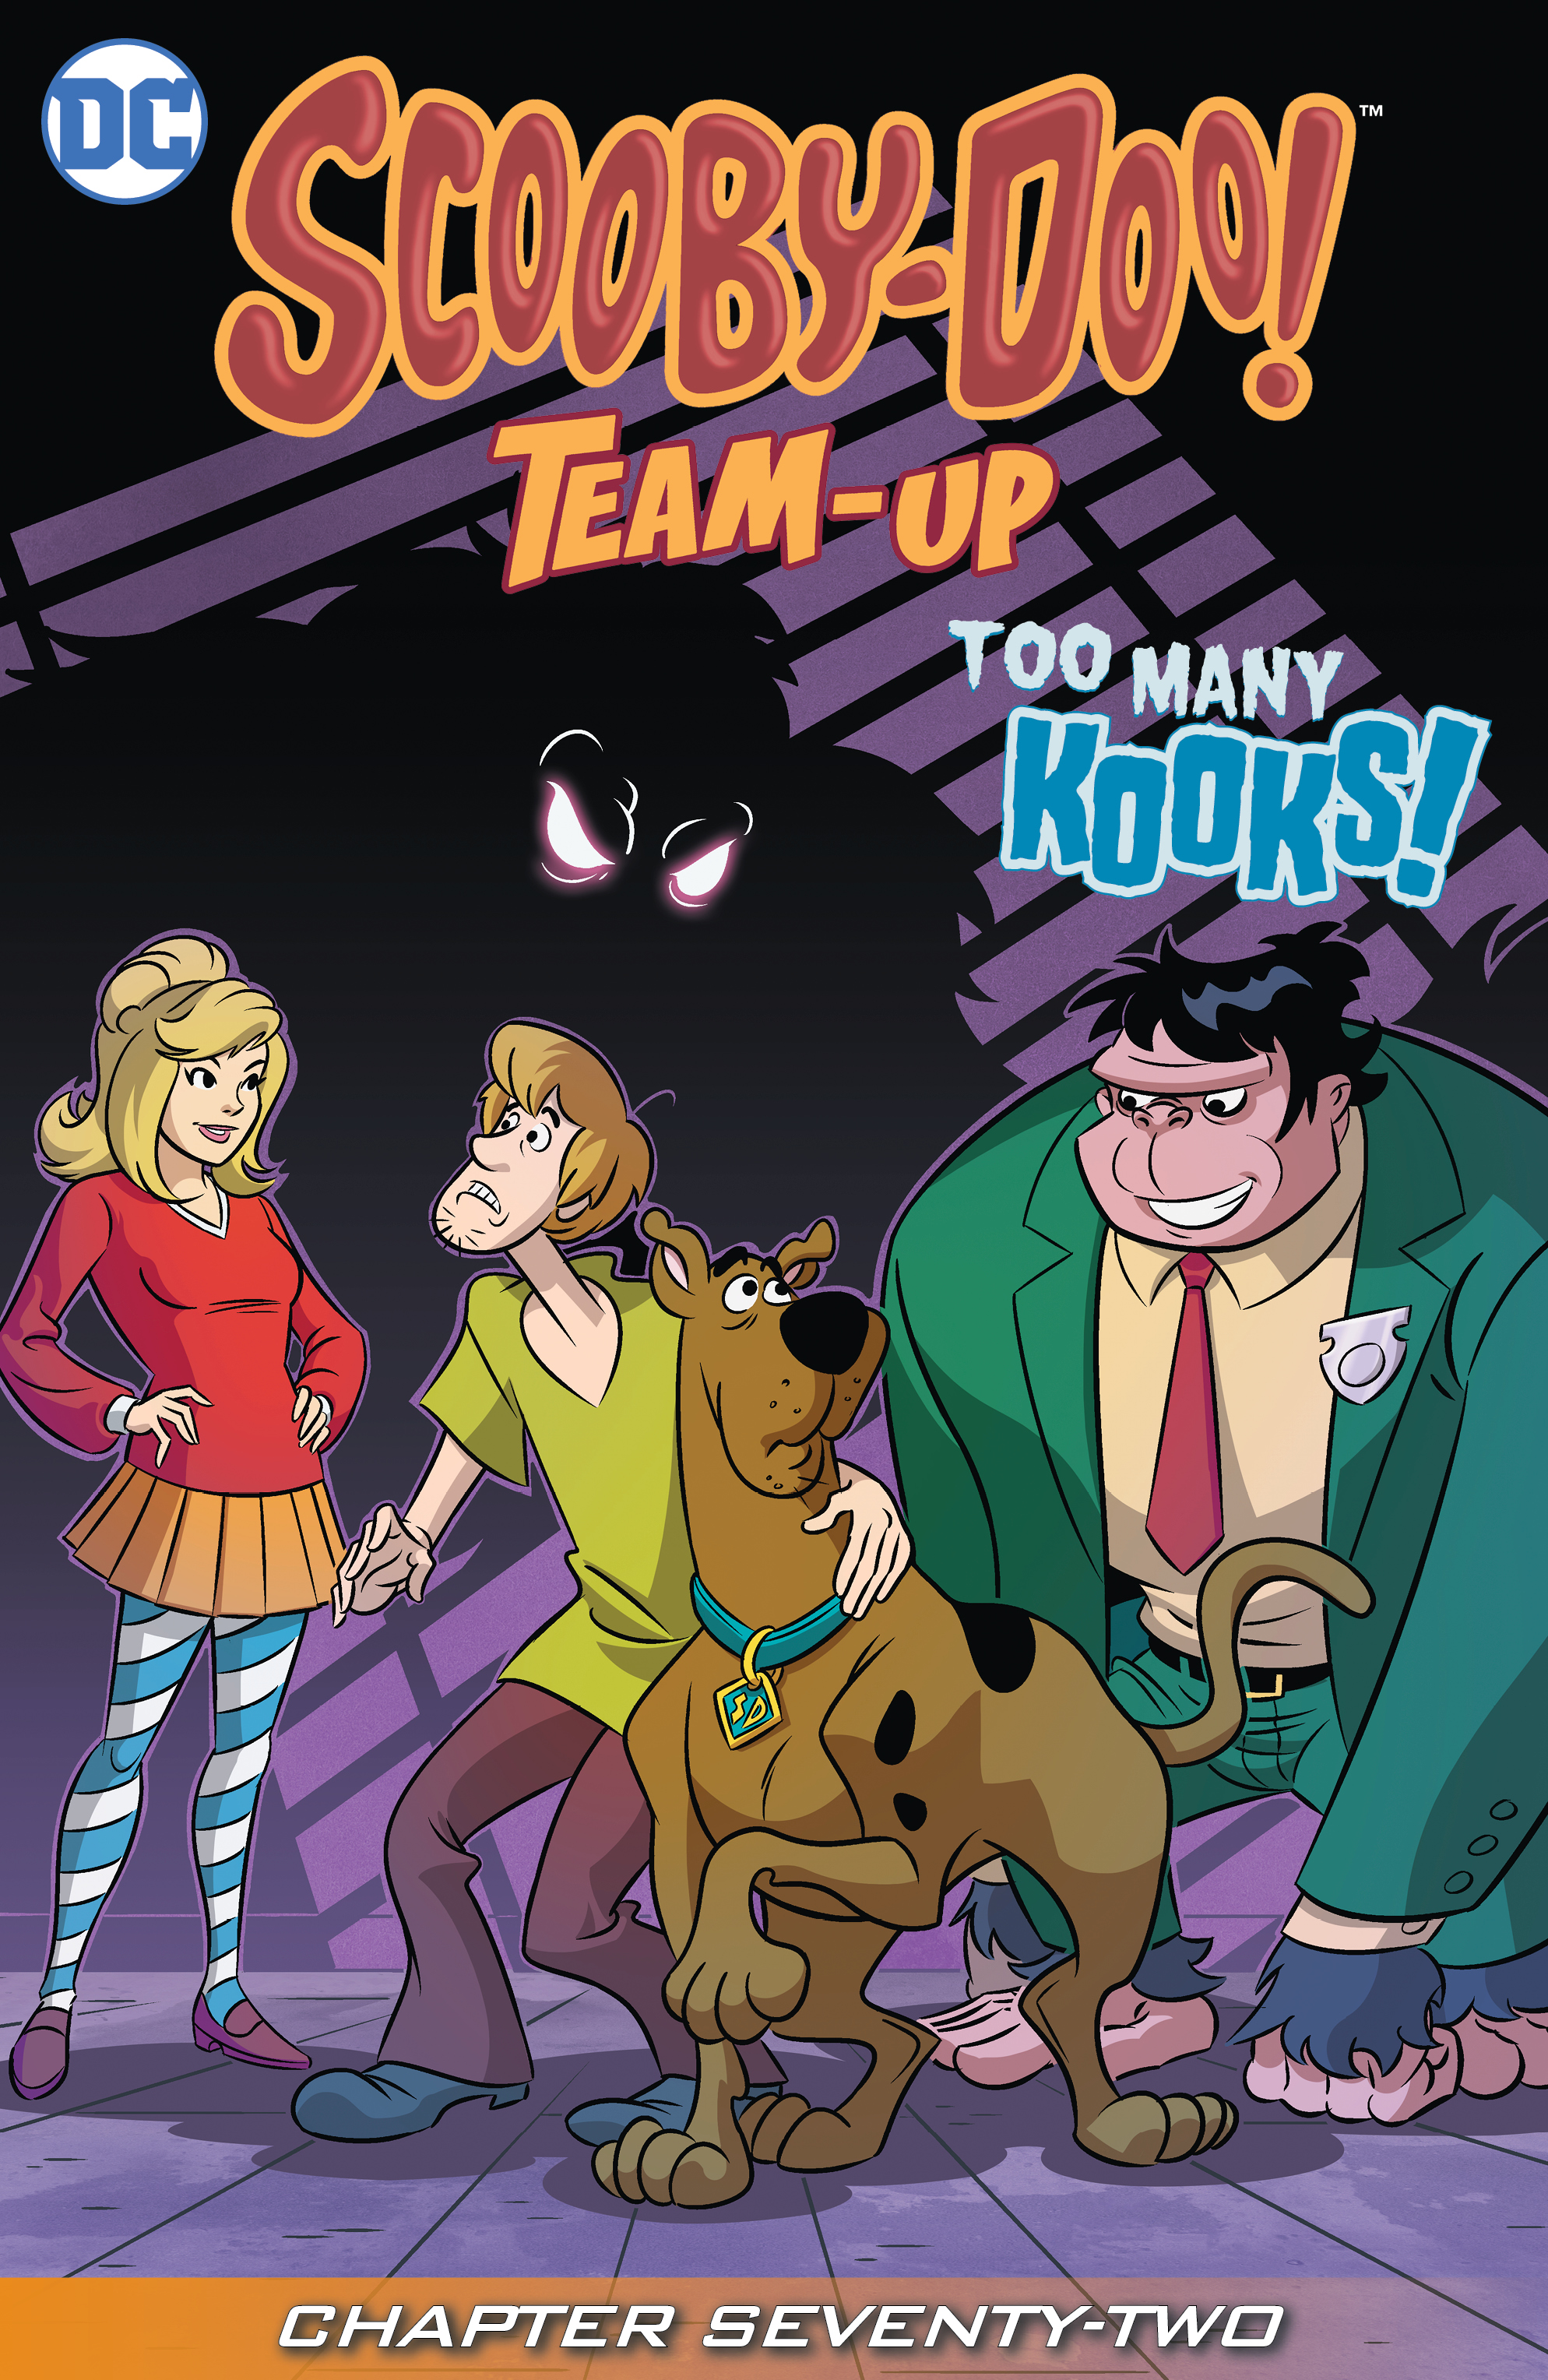 Scooby-Doo Team-Up #72 preview images